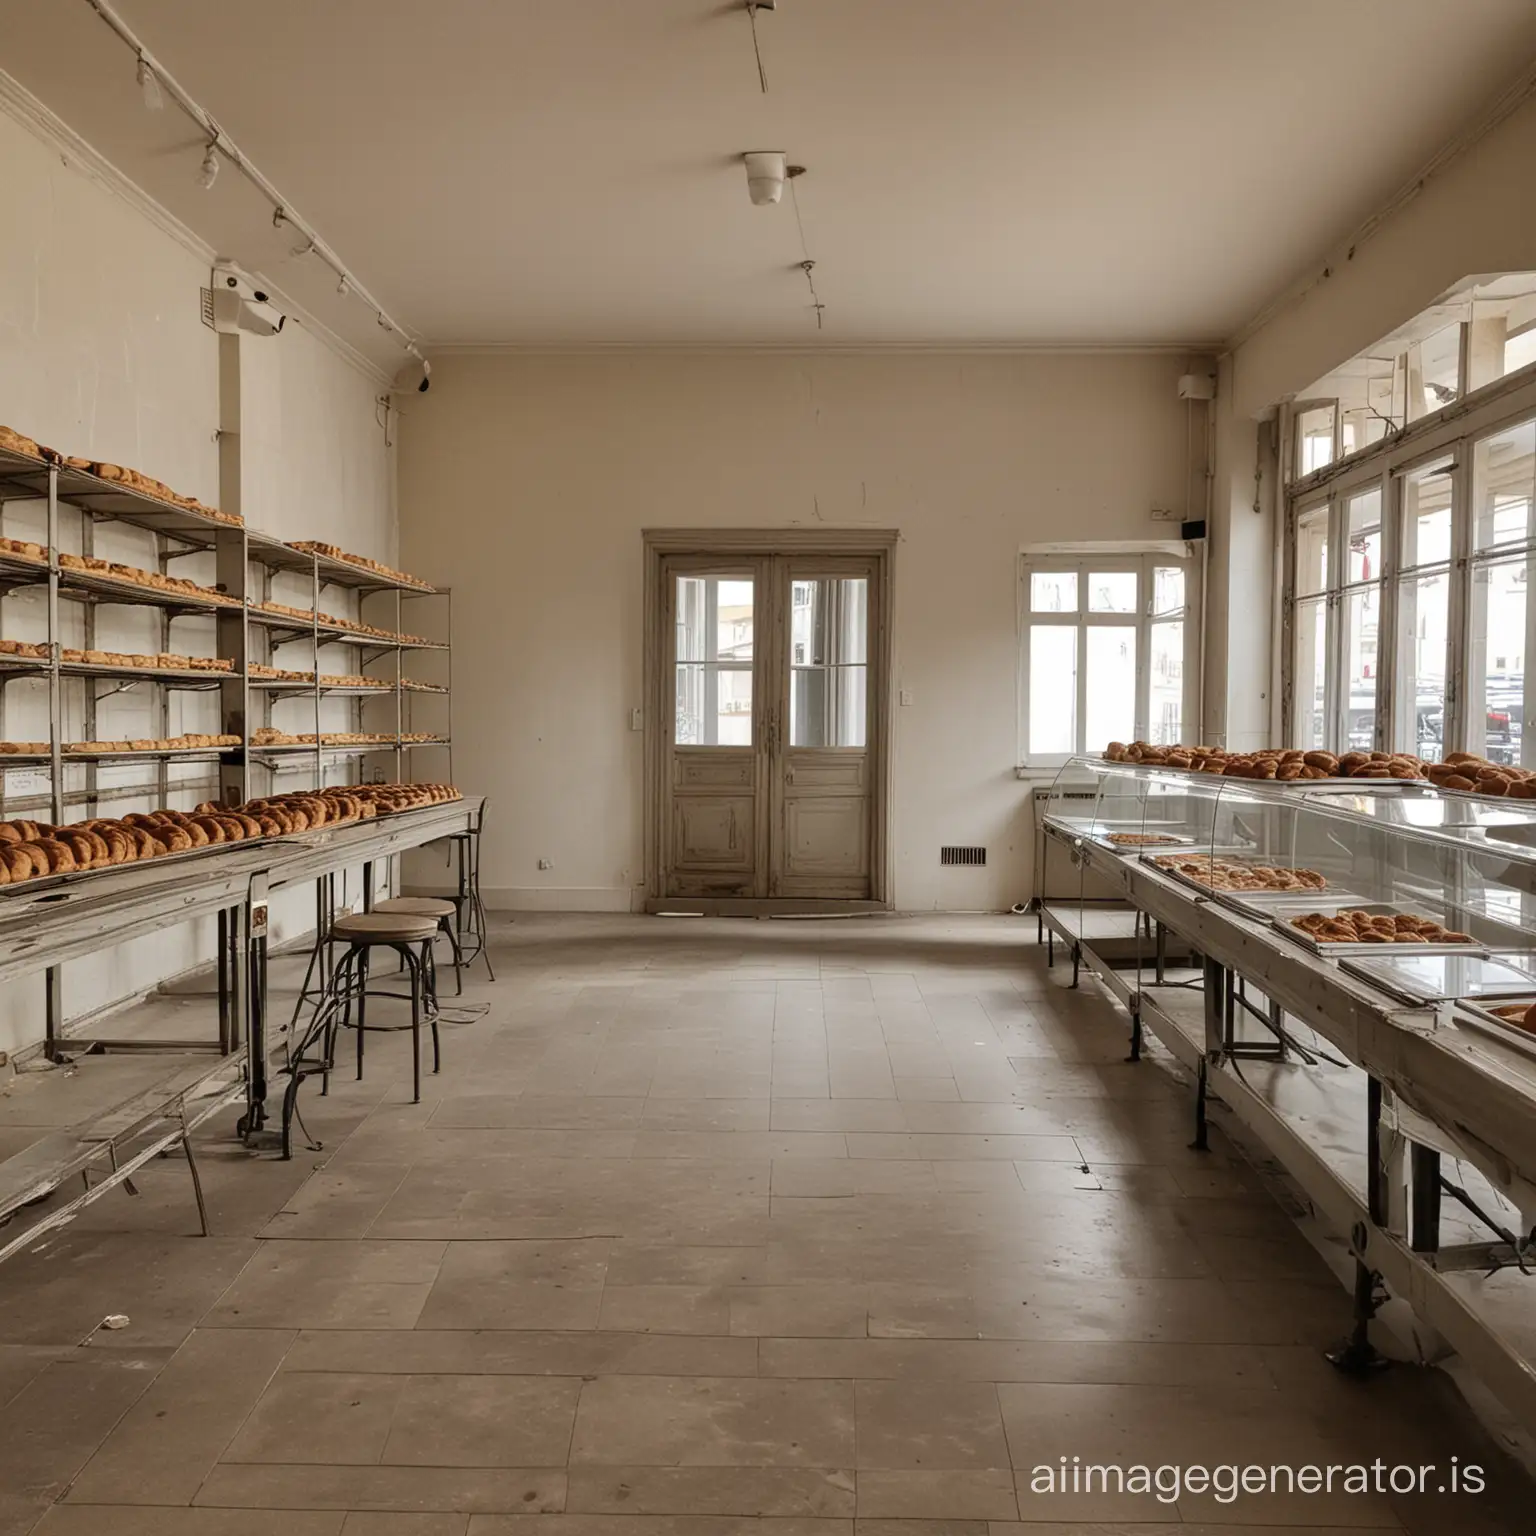 Quiet-Atmosphere-at-an-Empty-French-Bakery